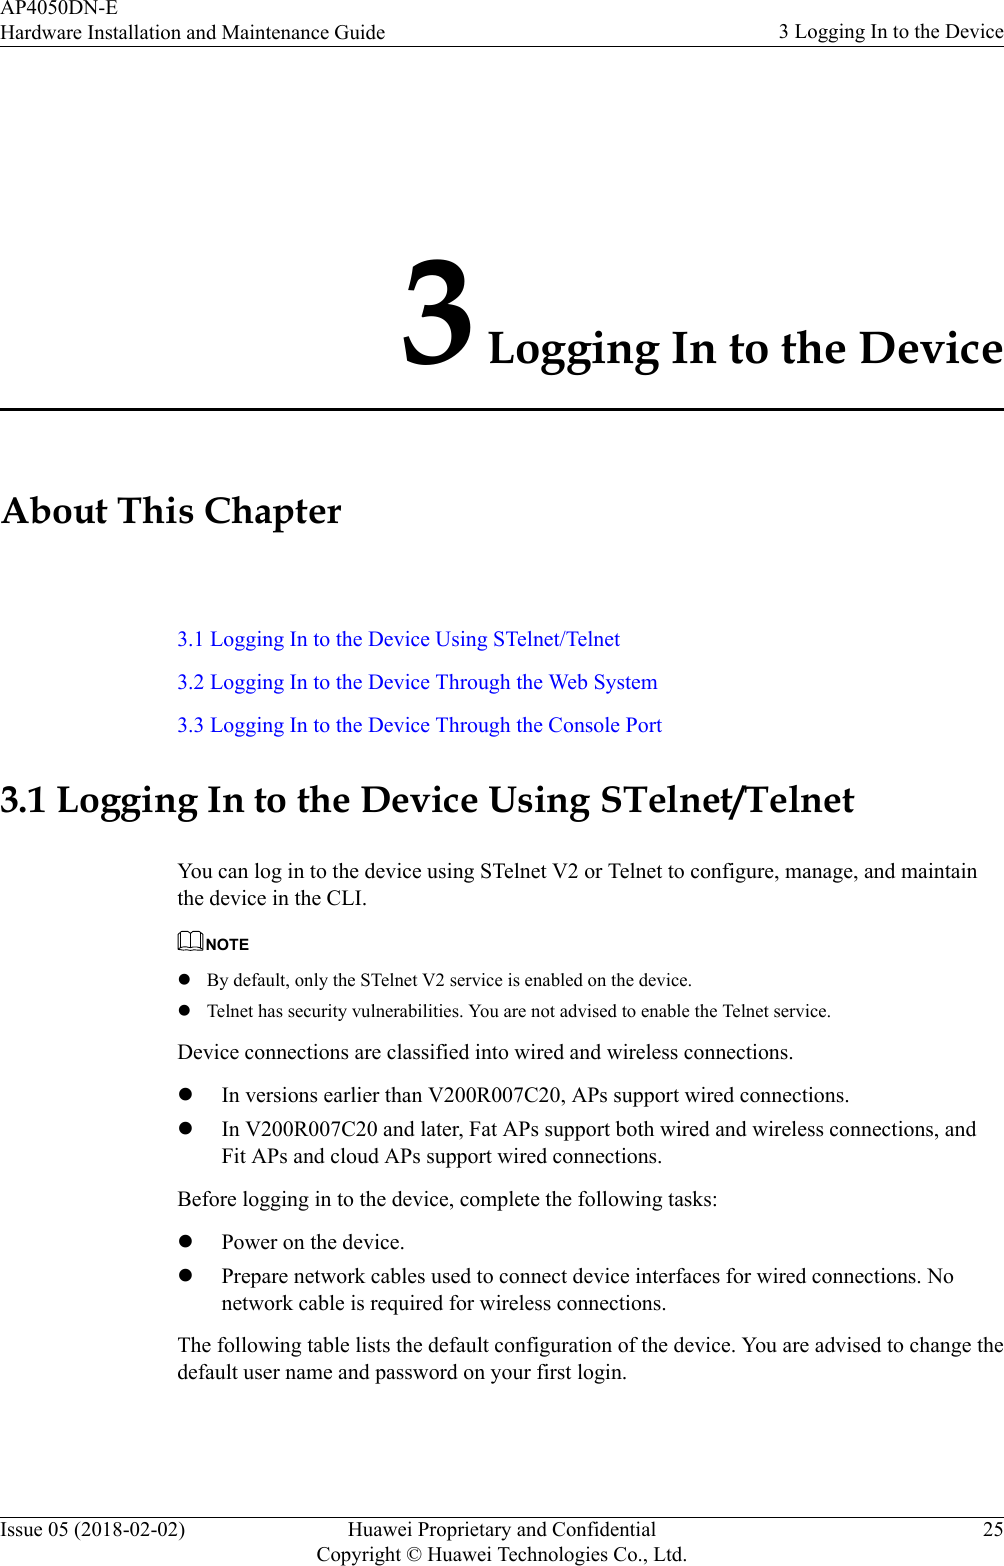 3 Logging In to the DeviceAbout This Chapter3.1 Logging In to the Device Using STelnet/Telnet3.2 Logging In to the Device Through the Web System3.3 Logging In to the Device Through the Console Port3.1 Logging In to the Device Using STelnet/TelnetYou can log in to the device using STelnet V2 or Telnet to configure, manage, and maintainthe device in the CLI.NOTElBy default, only the STelnet V2 service is enabled on the device.lTelnet has security vulnerabilities. You are not advised to enable the Telnet service.Device connections are classified into wired and wireless connections.lIn versions earlier than V200R007C20, APs support wired connections.lIn V200R007C20 and later, Fat APs support both wired and wireless connections, andFit APs and cloud APs support wired connections.Before logging in to the device, complete the following tasks:lPower on the device.lPrepare network cables used to connect device interfaces for wired connections. Nonetwork cable is required for wireless connections.The following table lists the default configuration of the device. You are advised to change thedefault user name and password on your first login.AP4050DN-EHardware Installation and Maintenance Guide 3 Logging In to the DeviceIssue 05 (2018-02-02) Huawei Proprietary and ConfidentialCopyright © Huawei Technologies Co., Ltd.25